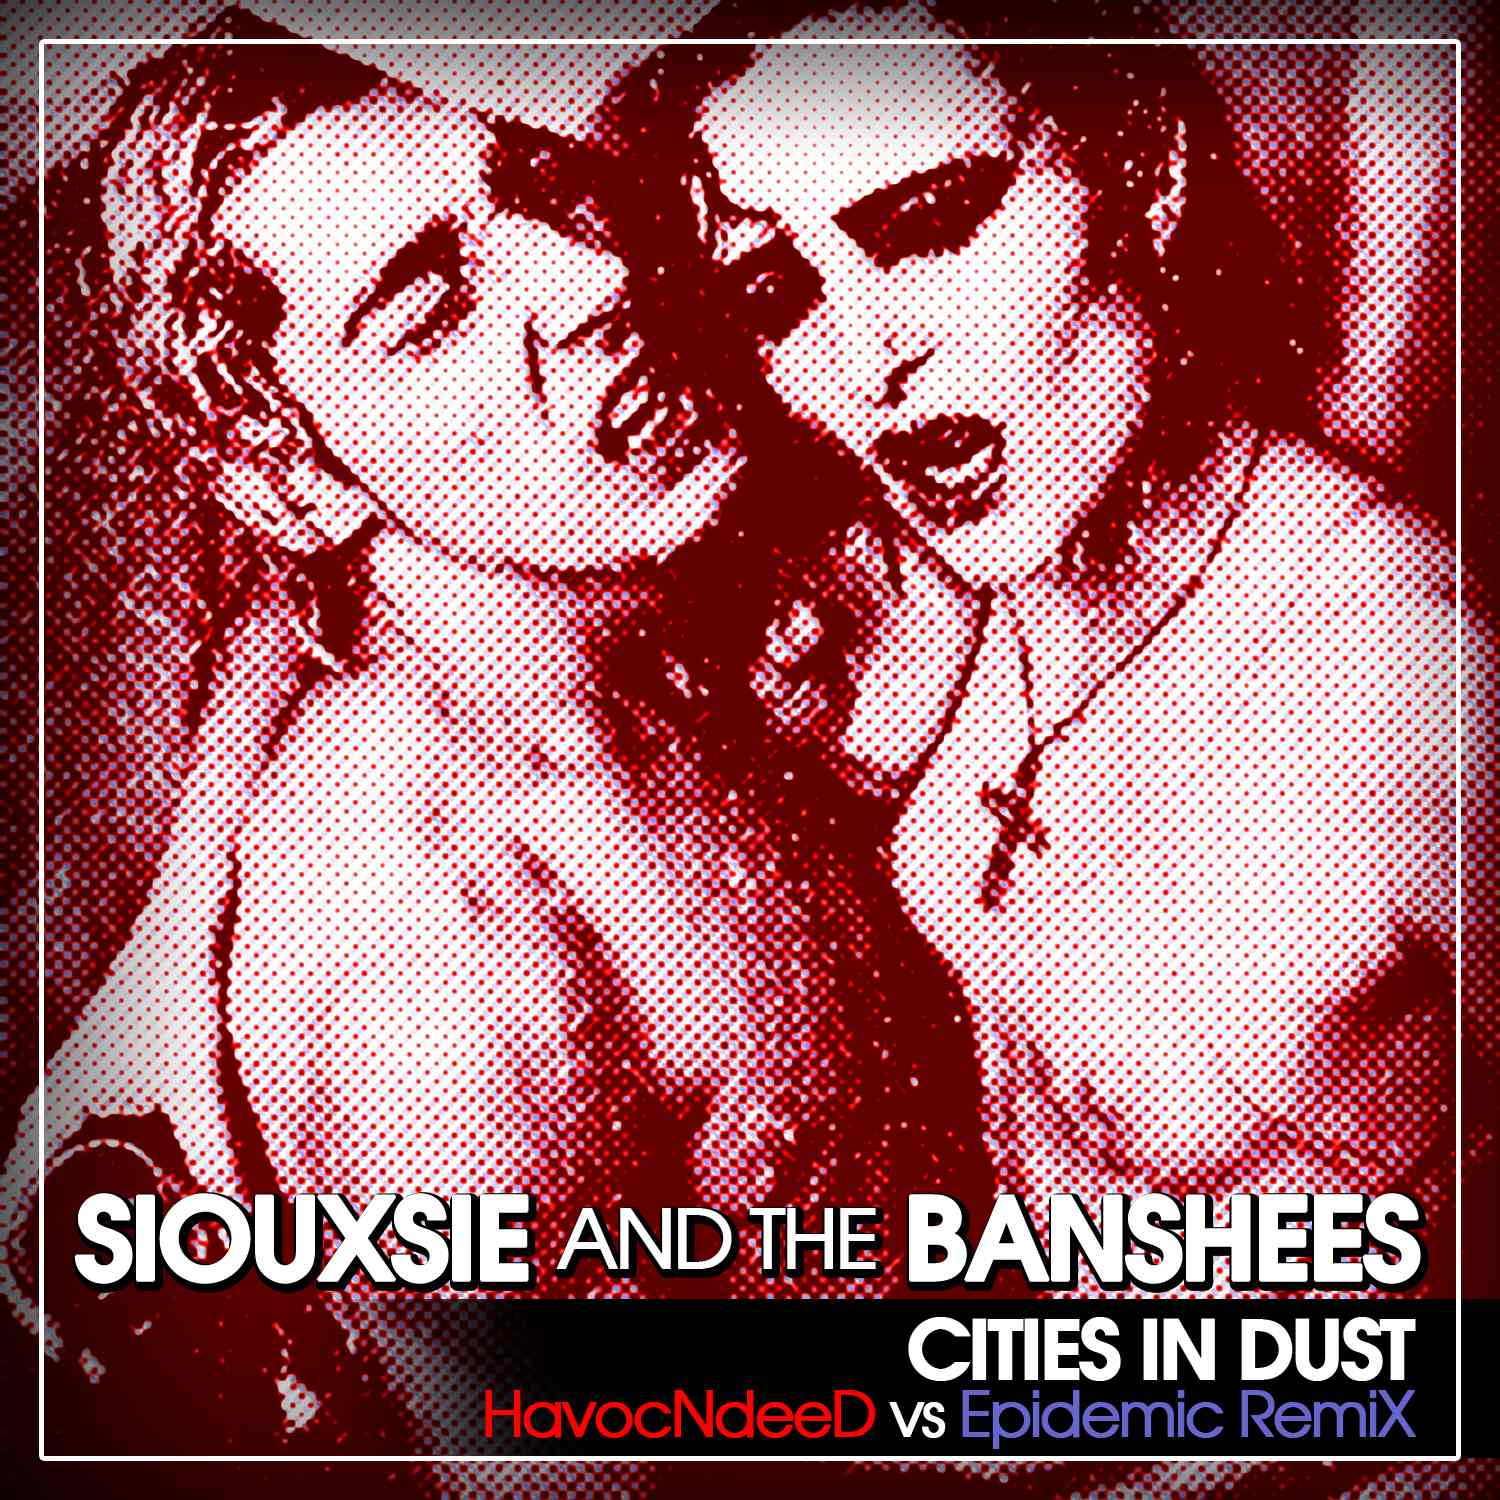 http://2.bp.blogspot.com/_kY_LYvs7vfg/TCZ0NJ65IsI/AAAAAAAACEI/T3rs2djA6rE/s1600/Siouxsie-banshees-havocNdeed-epidemic-coverLQ.jpg